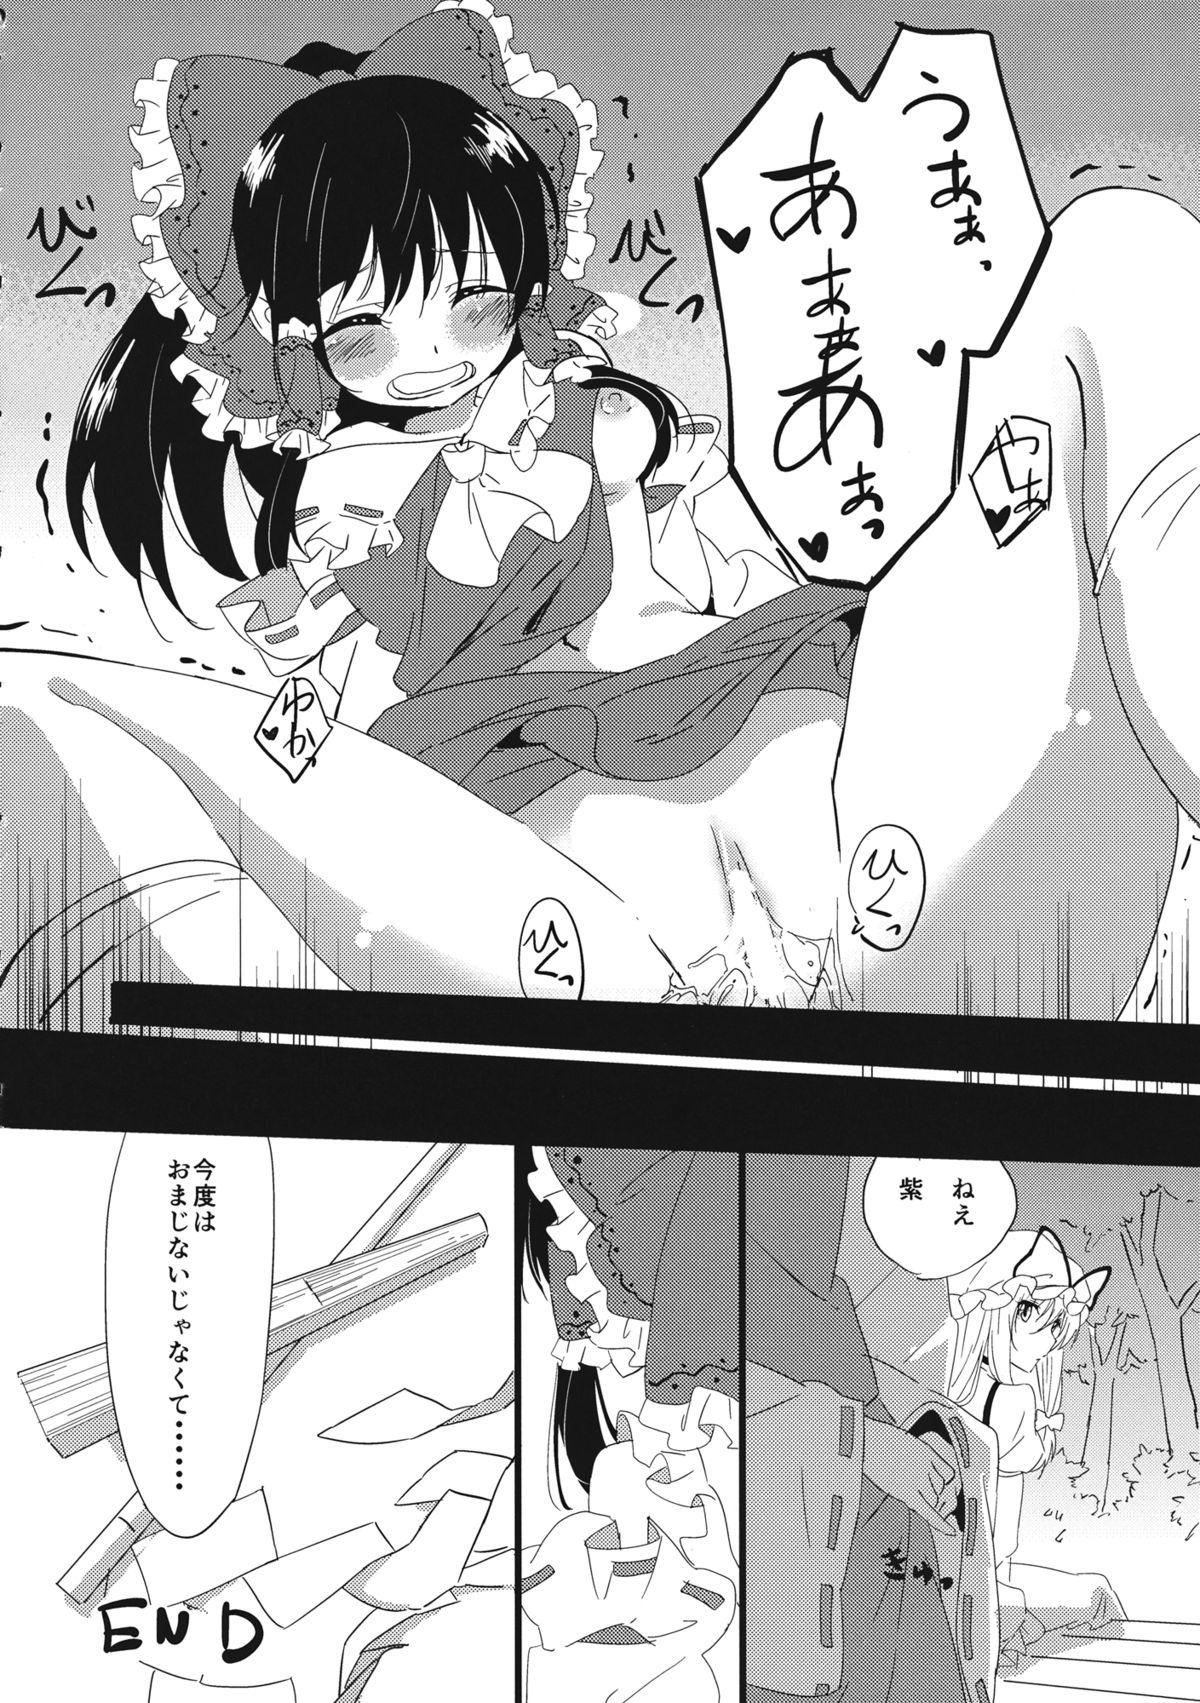 Hard Core Sex Touhou Muchi Shichu Goudou - Toho joint magazine sex in the ignorant situations - Touhou project Lesbiansex - Page 8